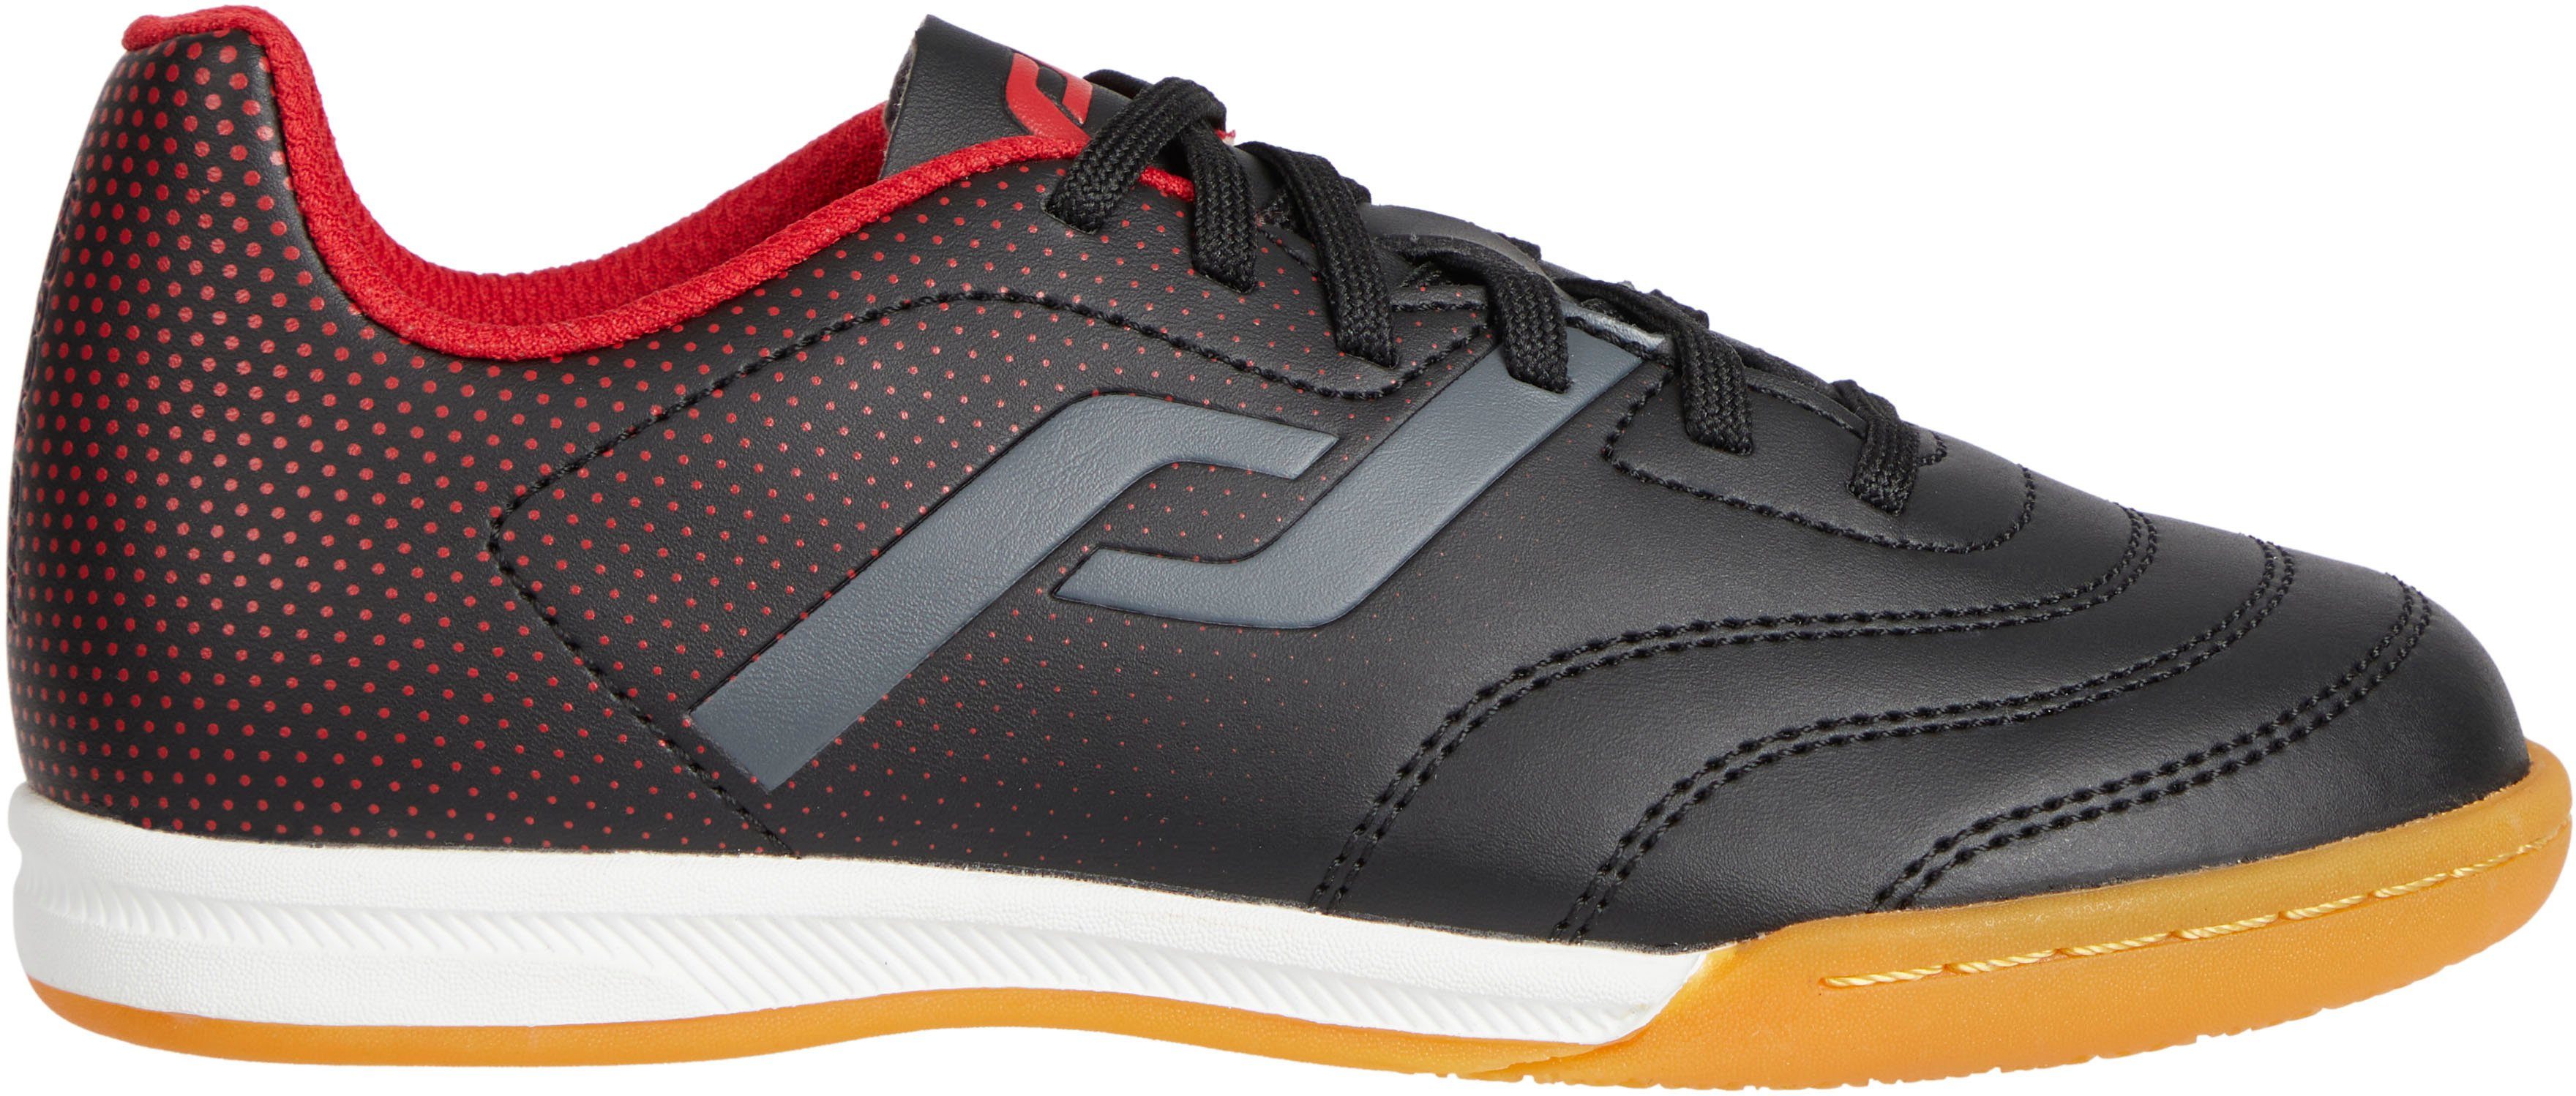 Pro Touch Ind Classic IN JR III Fußballschuh BLACK/RED/ANTHRACITE